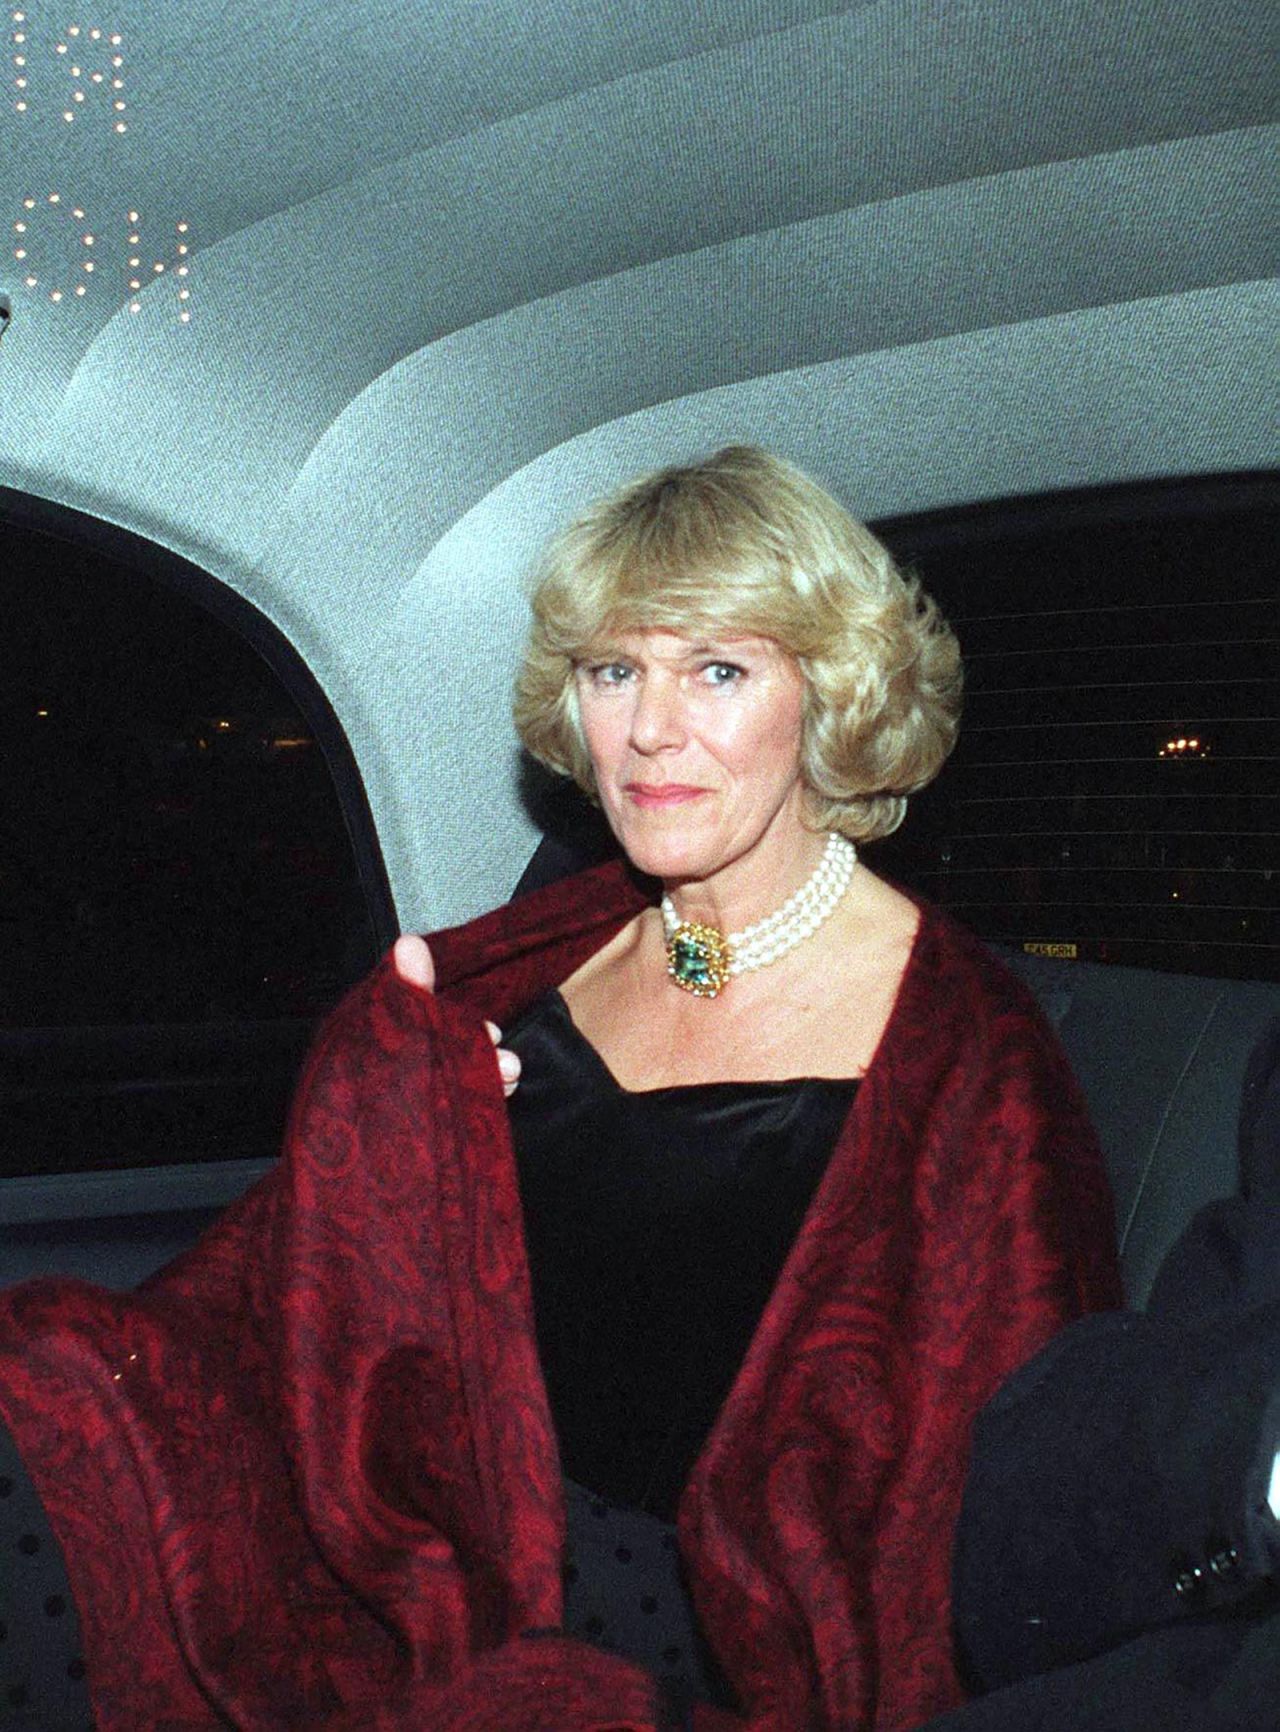 At a party at The Ritz in London in 1995, Camilla donned one of her favorite jewelry pieces: A three strand pearl necklace completed by a central aquamarine stone, paired with an off-the-shoulder black cocktail dress.